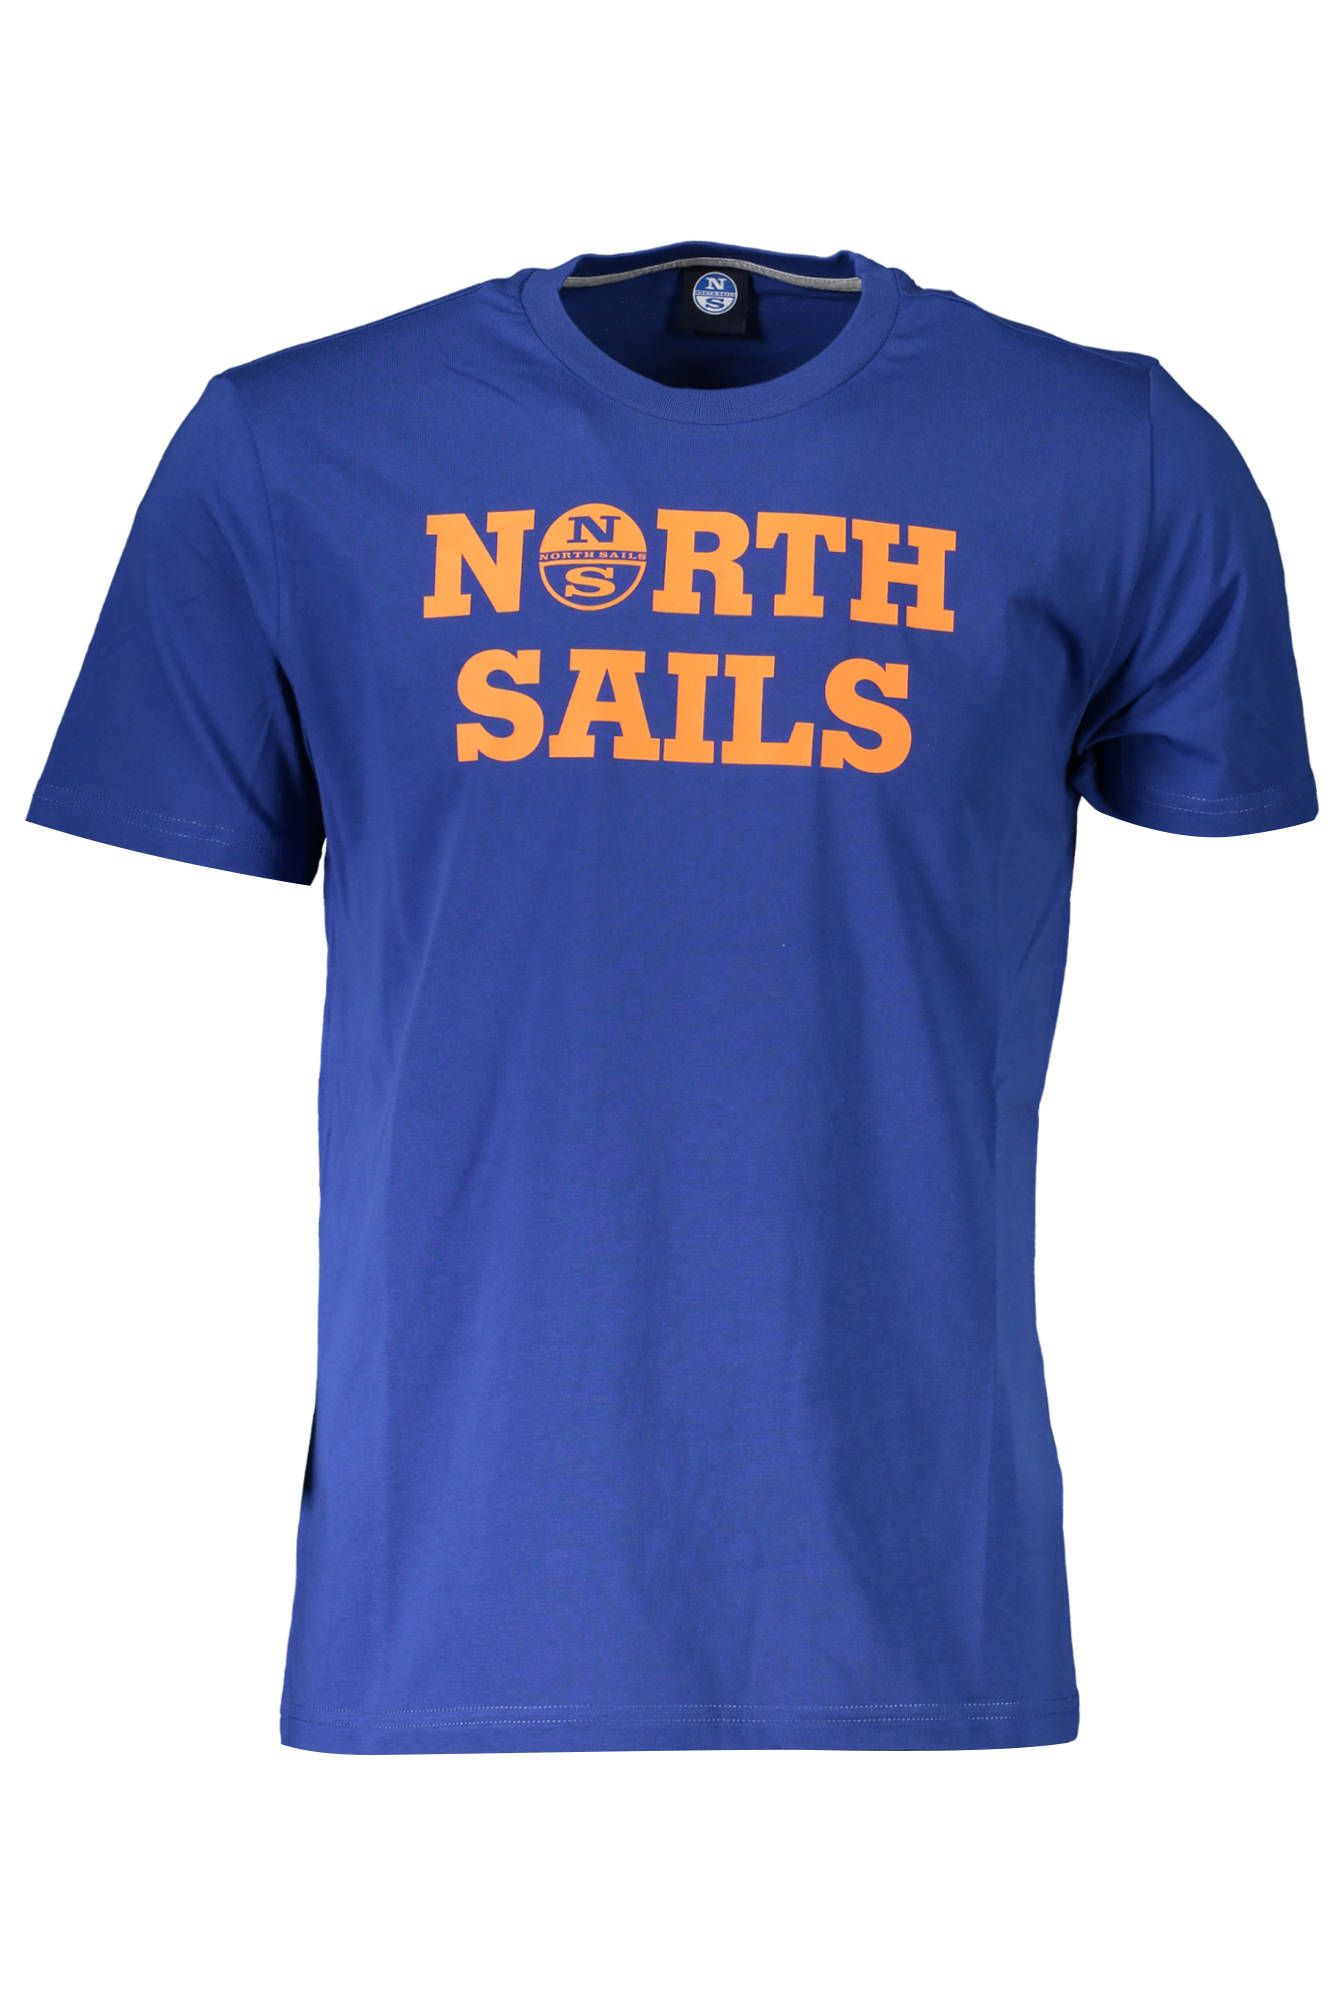 North Sails Chic Blue Cotton Tee with Signature Print